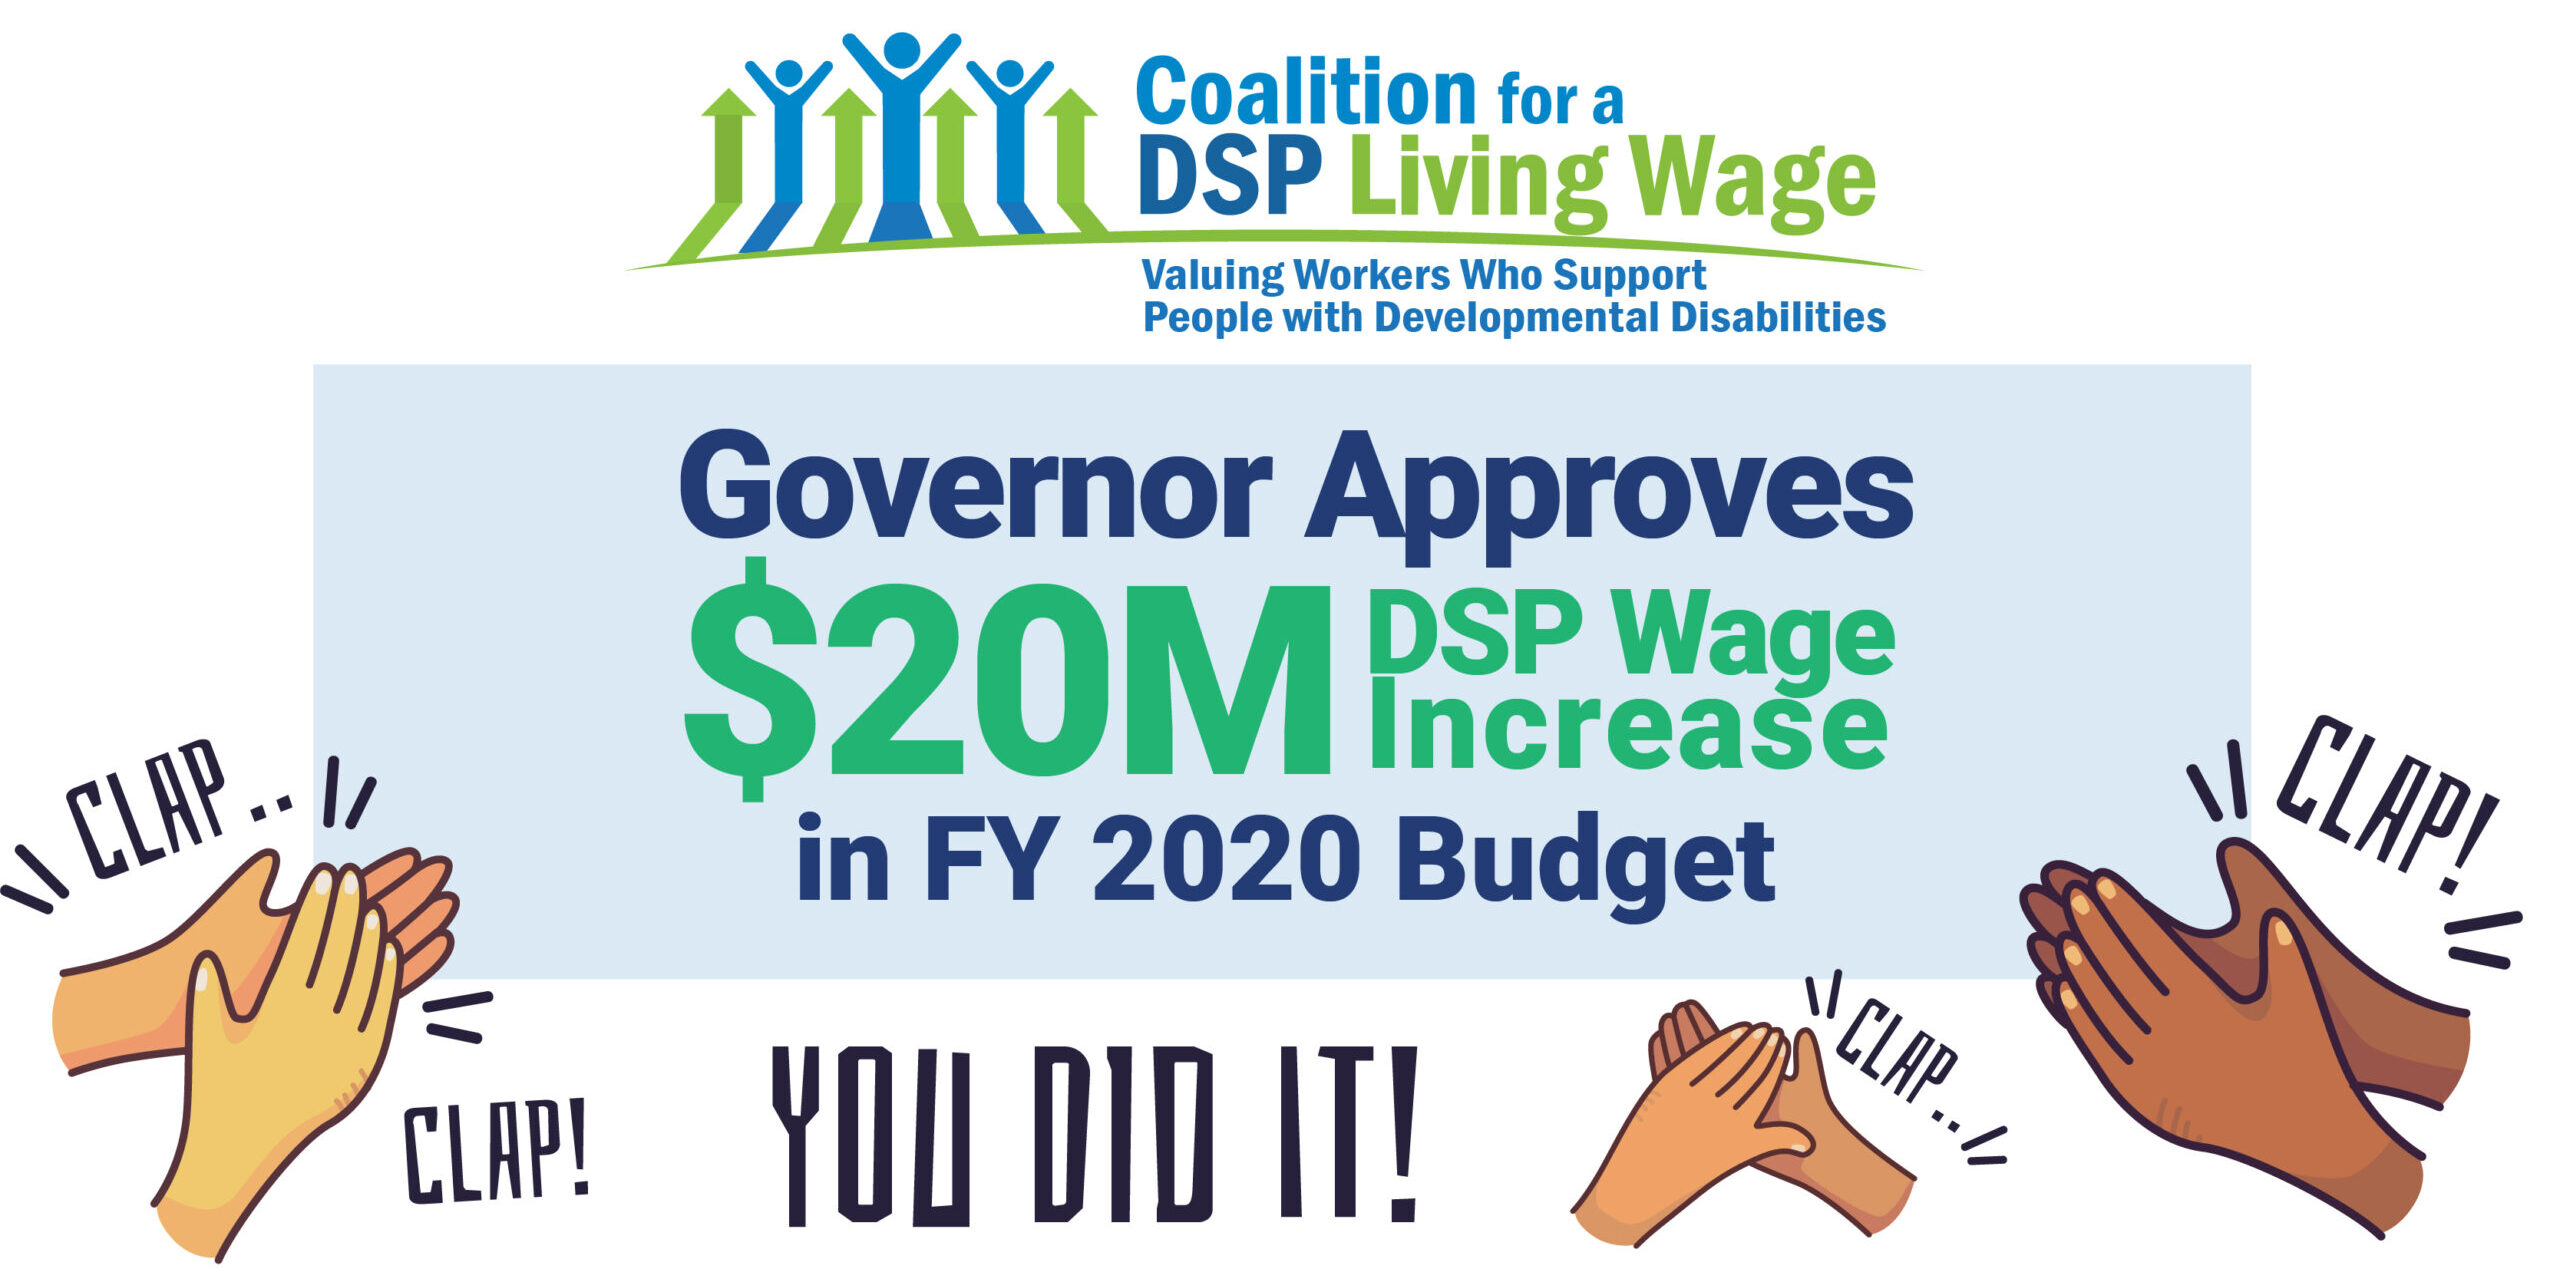 Governor Approves 20 Million DSP Wage Increase The Coalition for a